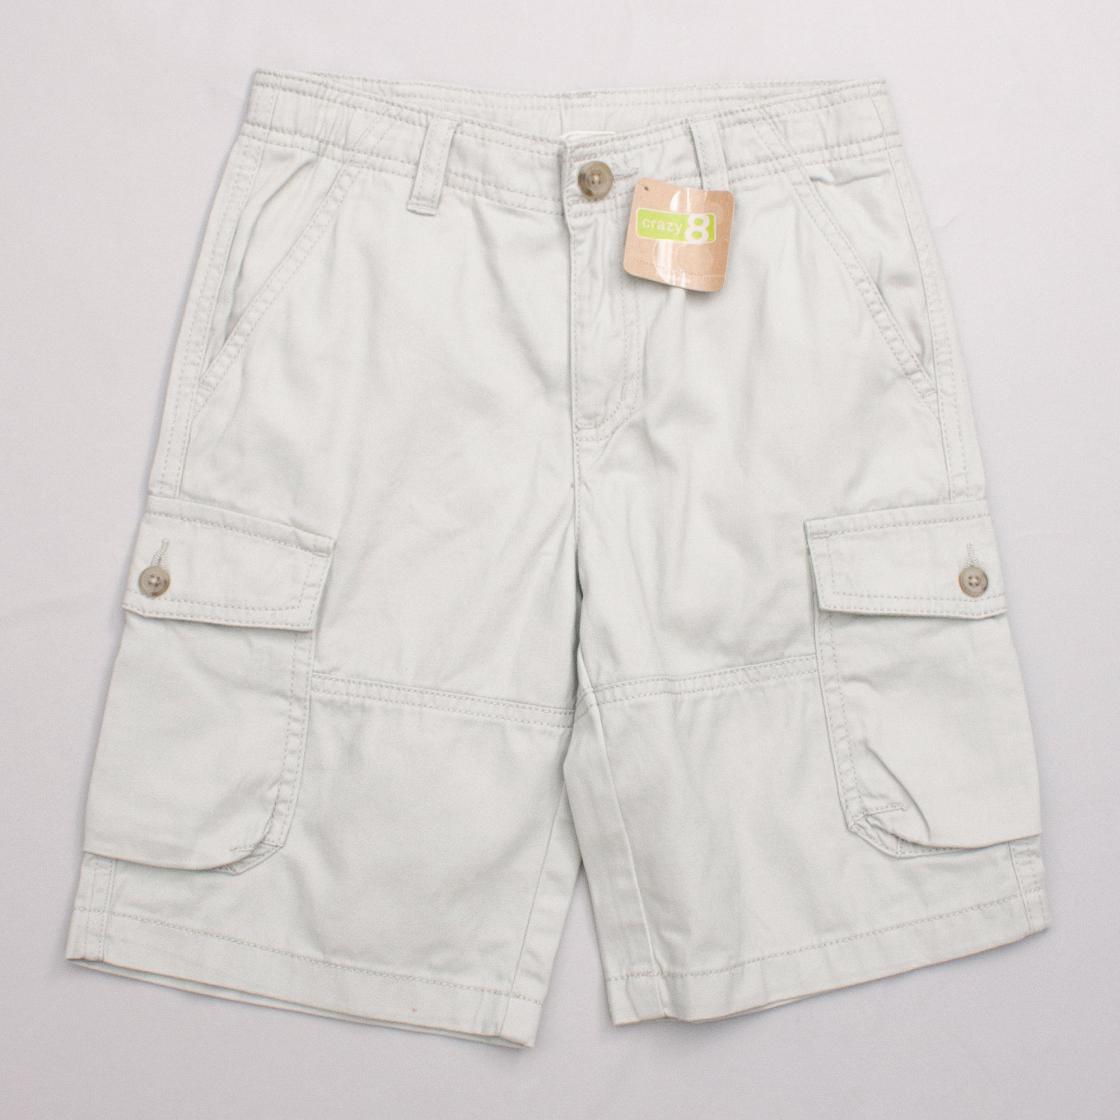 Crazy8 Brown Shorts "Brand New"